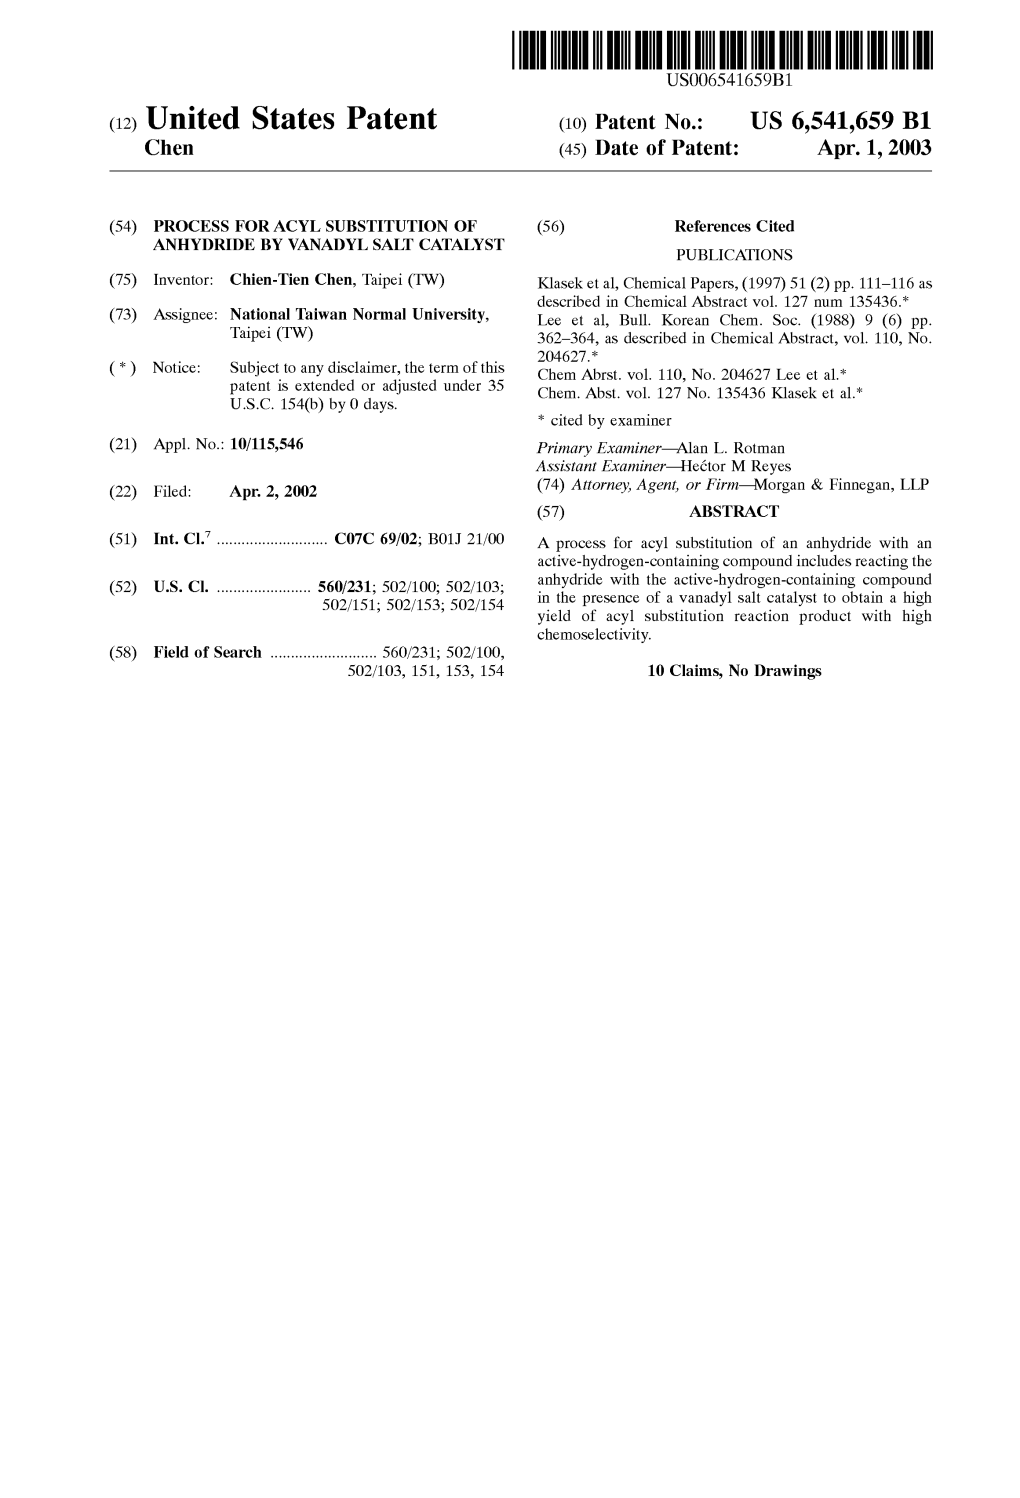 (12) United States Patent (10) Patent No.: US 6,541,659 B1 Chen (45) Date of Patent: Apr